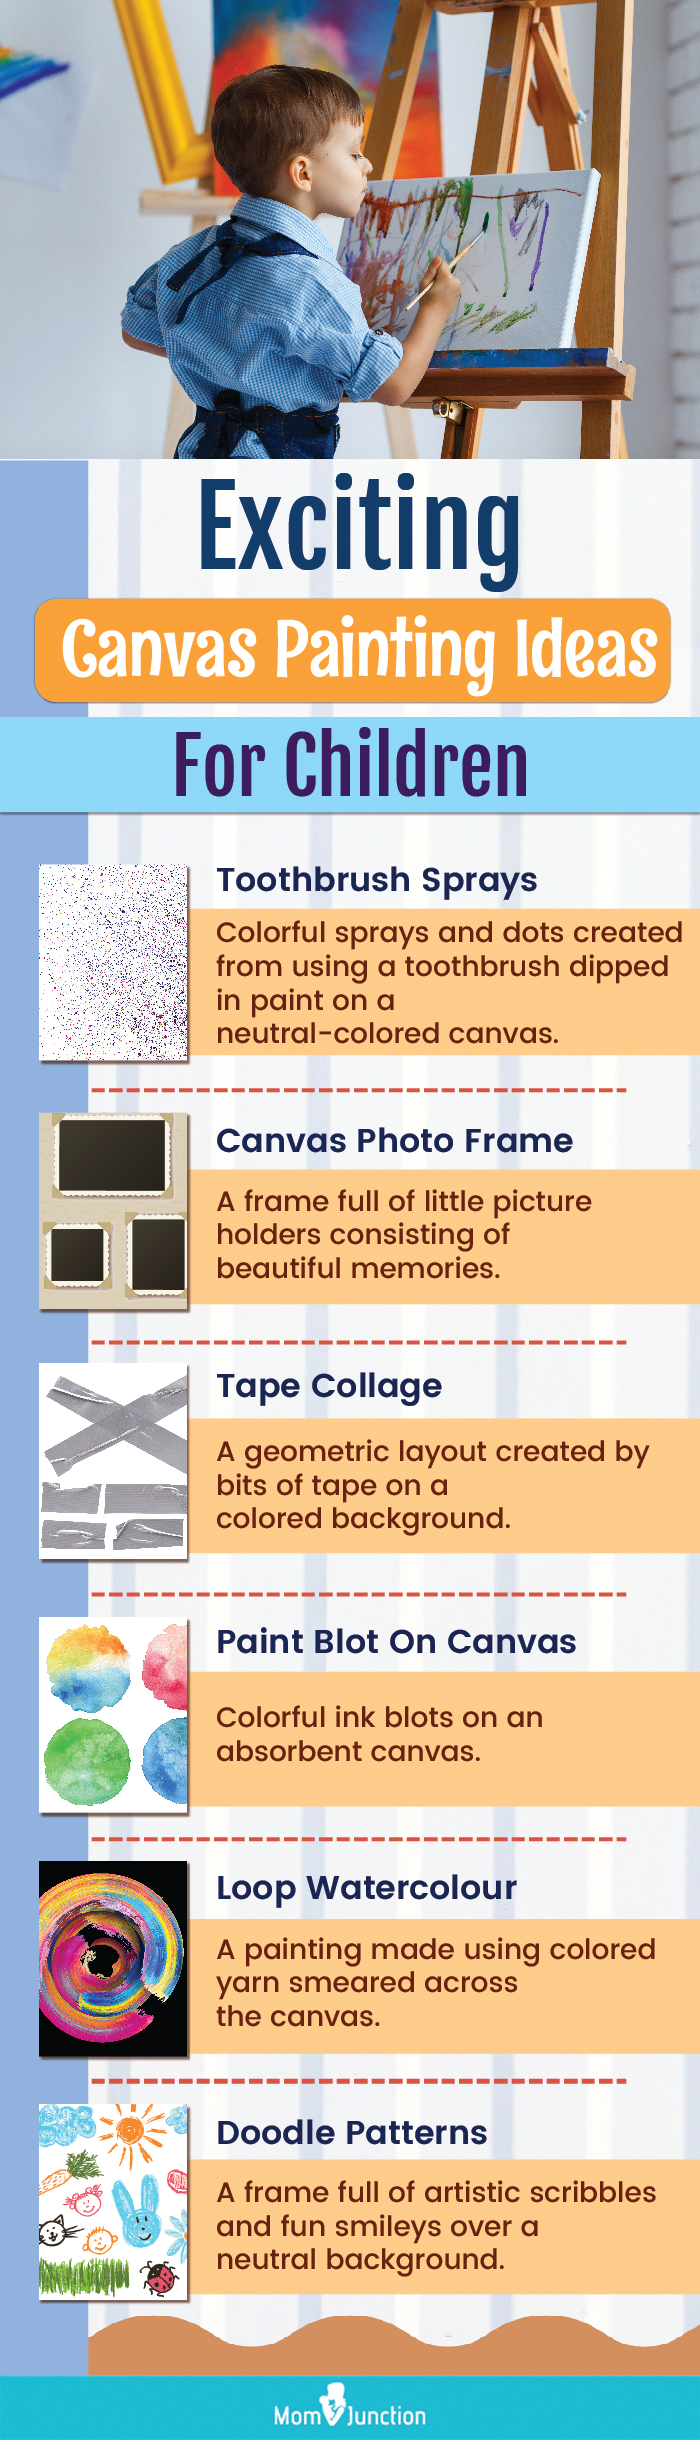 creative canvas painting ideas for children (infographic)